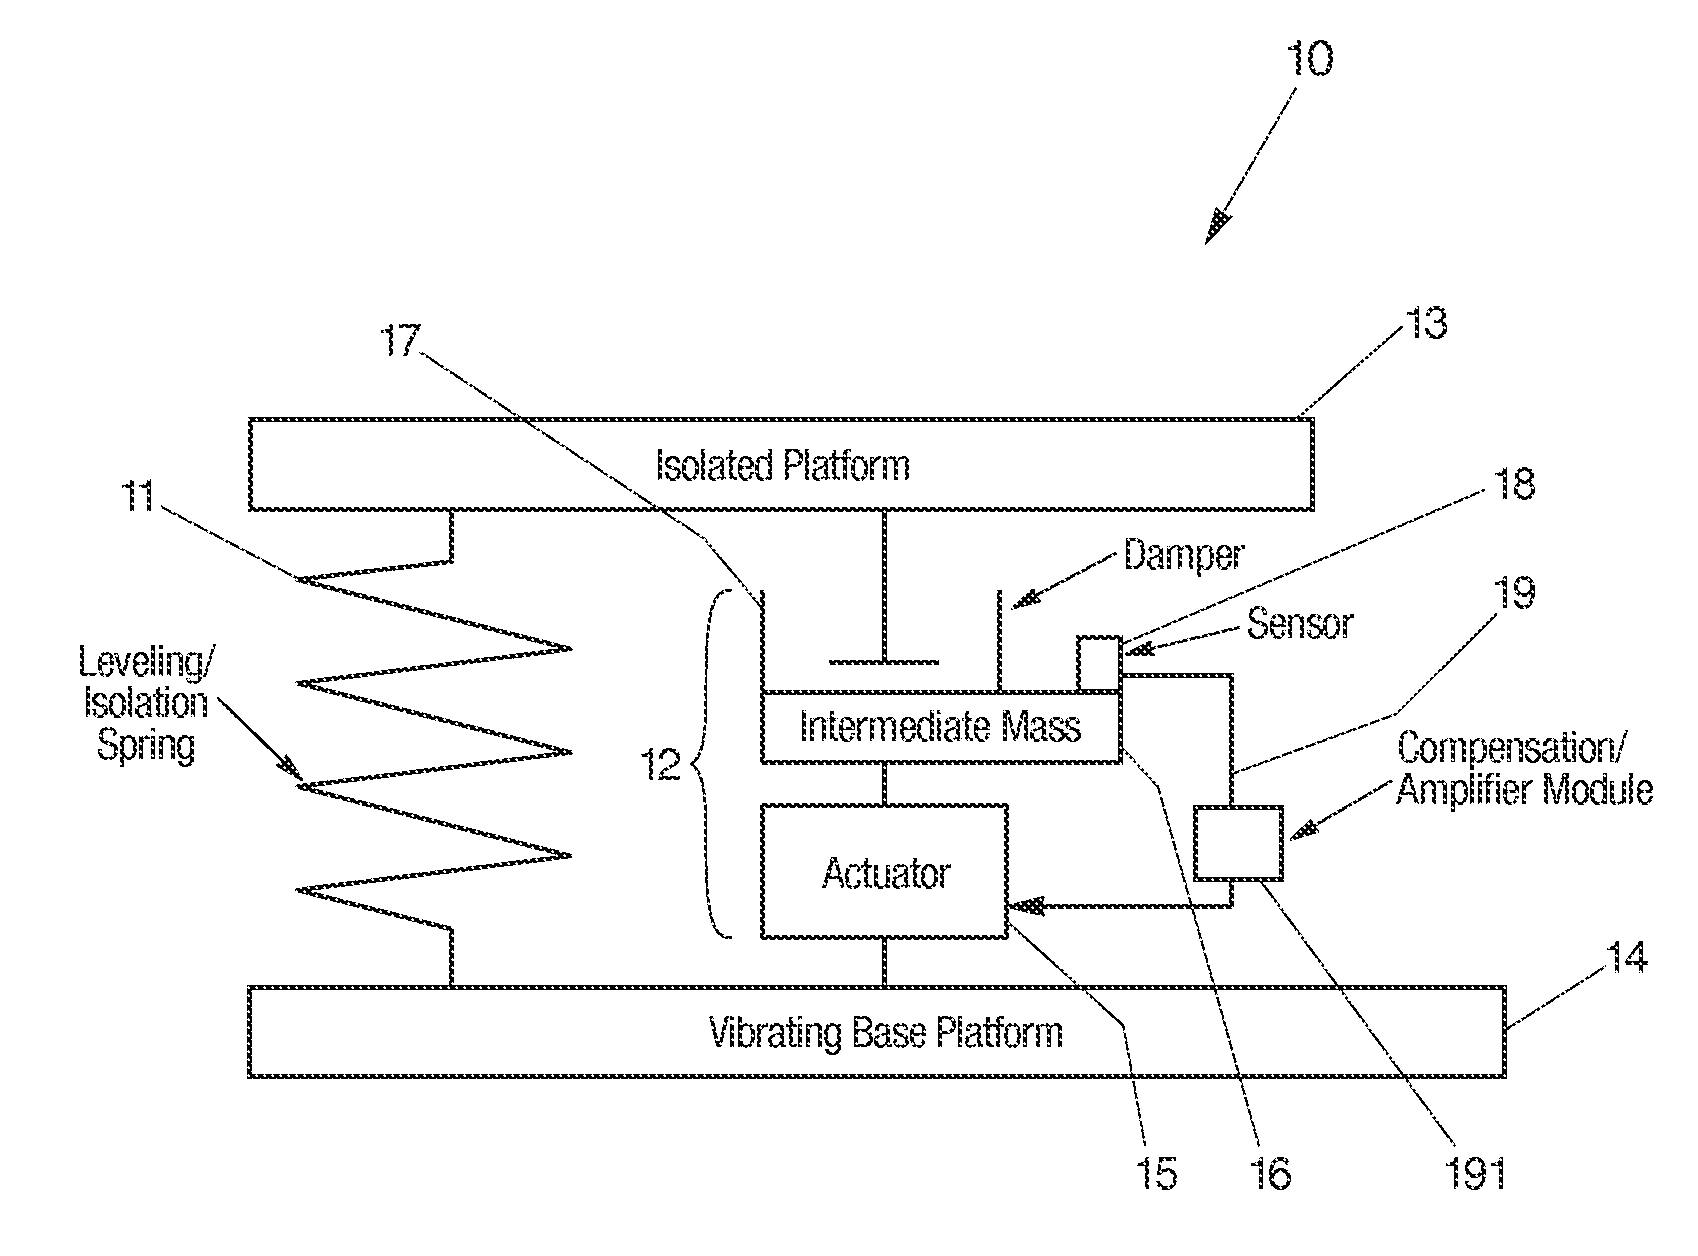 Systems and methods for active vibration damping